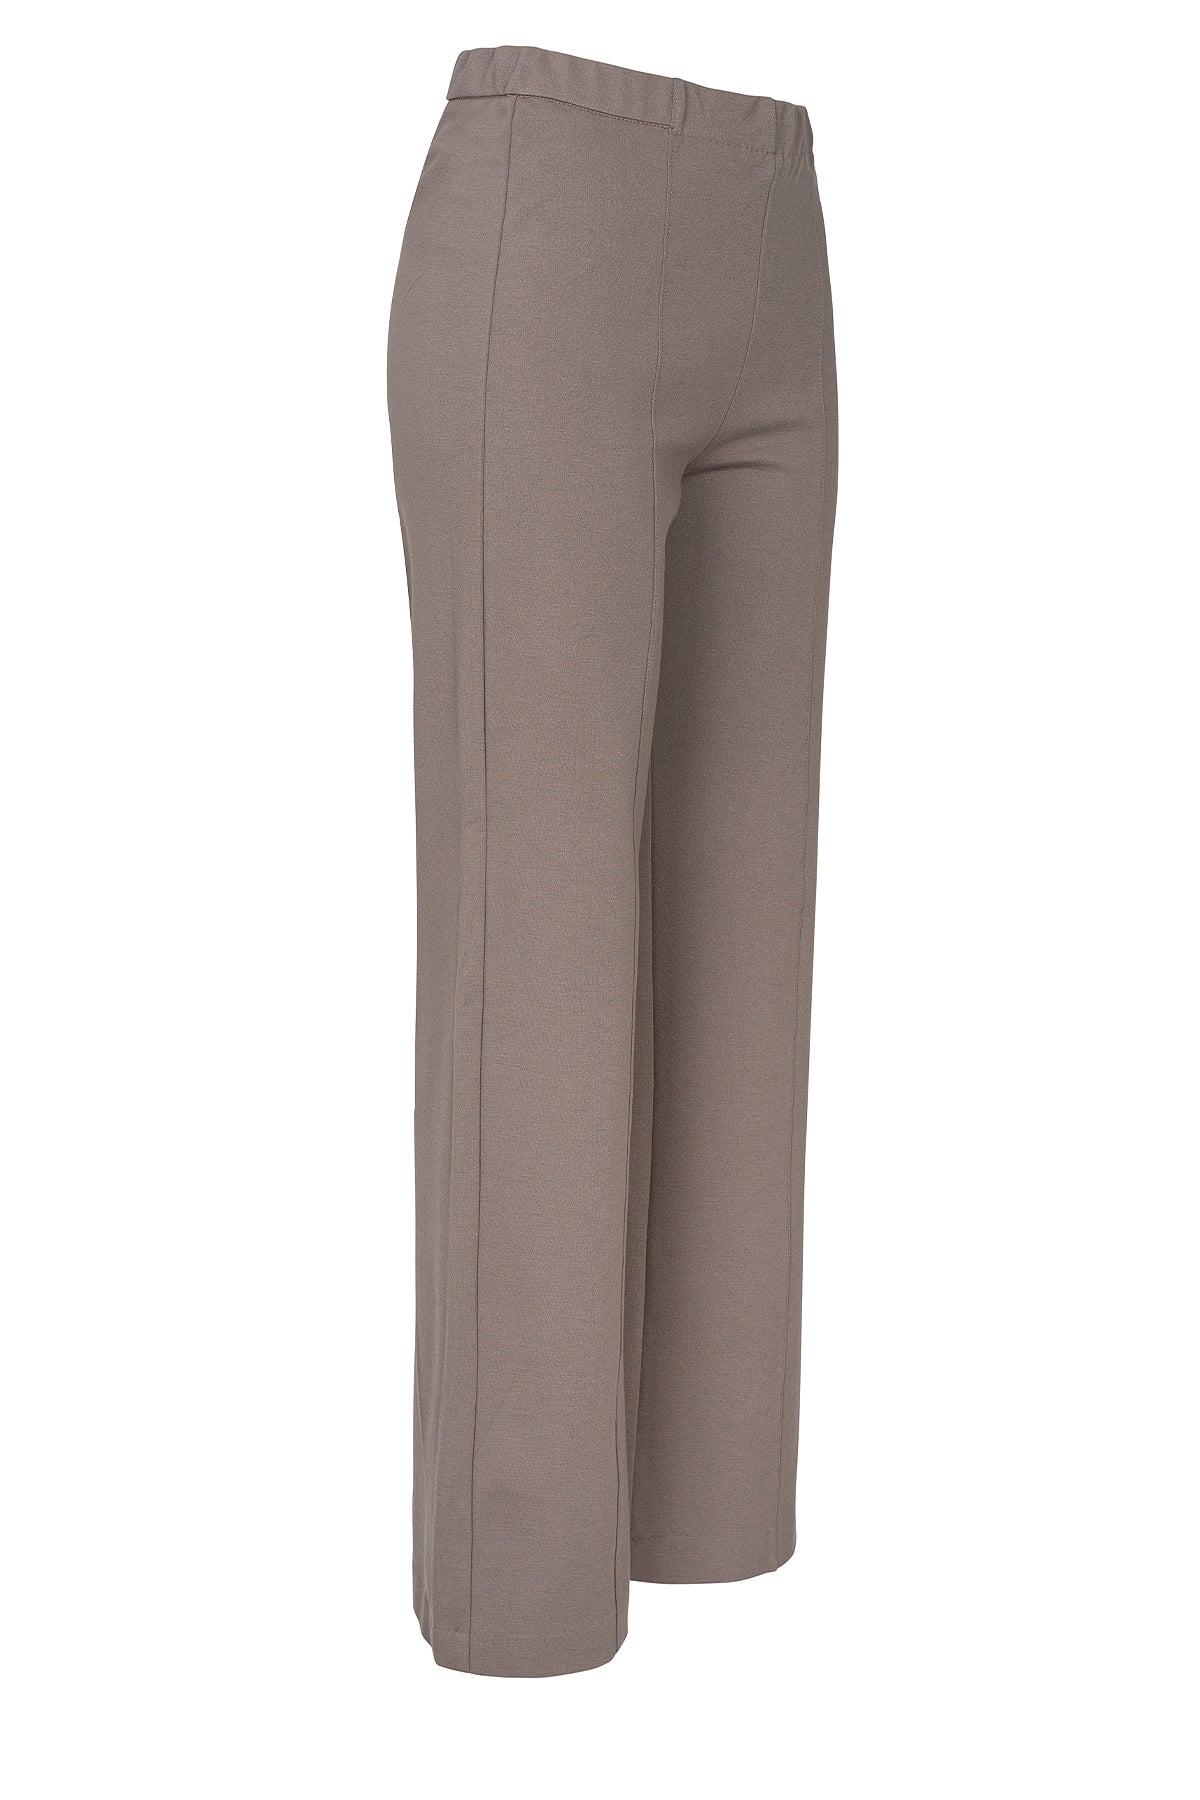 LUXZUZ // ONE TWO Beate Pant Pant 765 Drift Wood